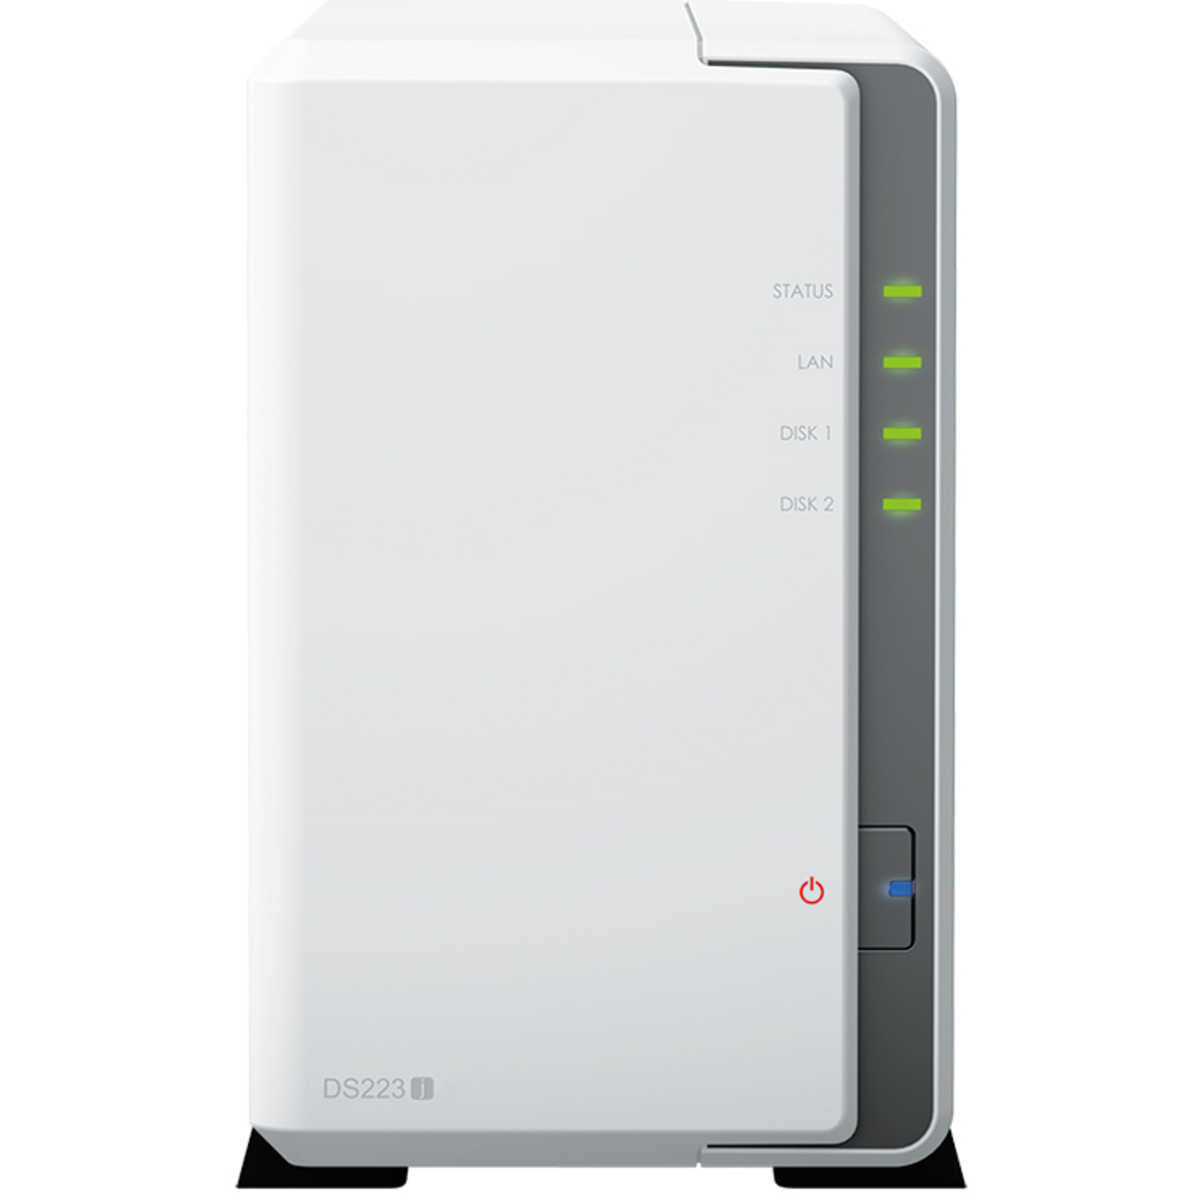 Synology DiskStation DS223j 16tb 2-Bay Desktop Personal / Basic Home / Small Office NAS - Network Attached Storage Device 1x16tb Western Digital Ultrastar DC HC550 WUH721816ALE6L4 3.5 7200rpm SATA 6Gb/s HDD ENTERPRISE Class Drives Installed - Burn-In Tested DiskStation DS223j